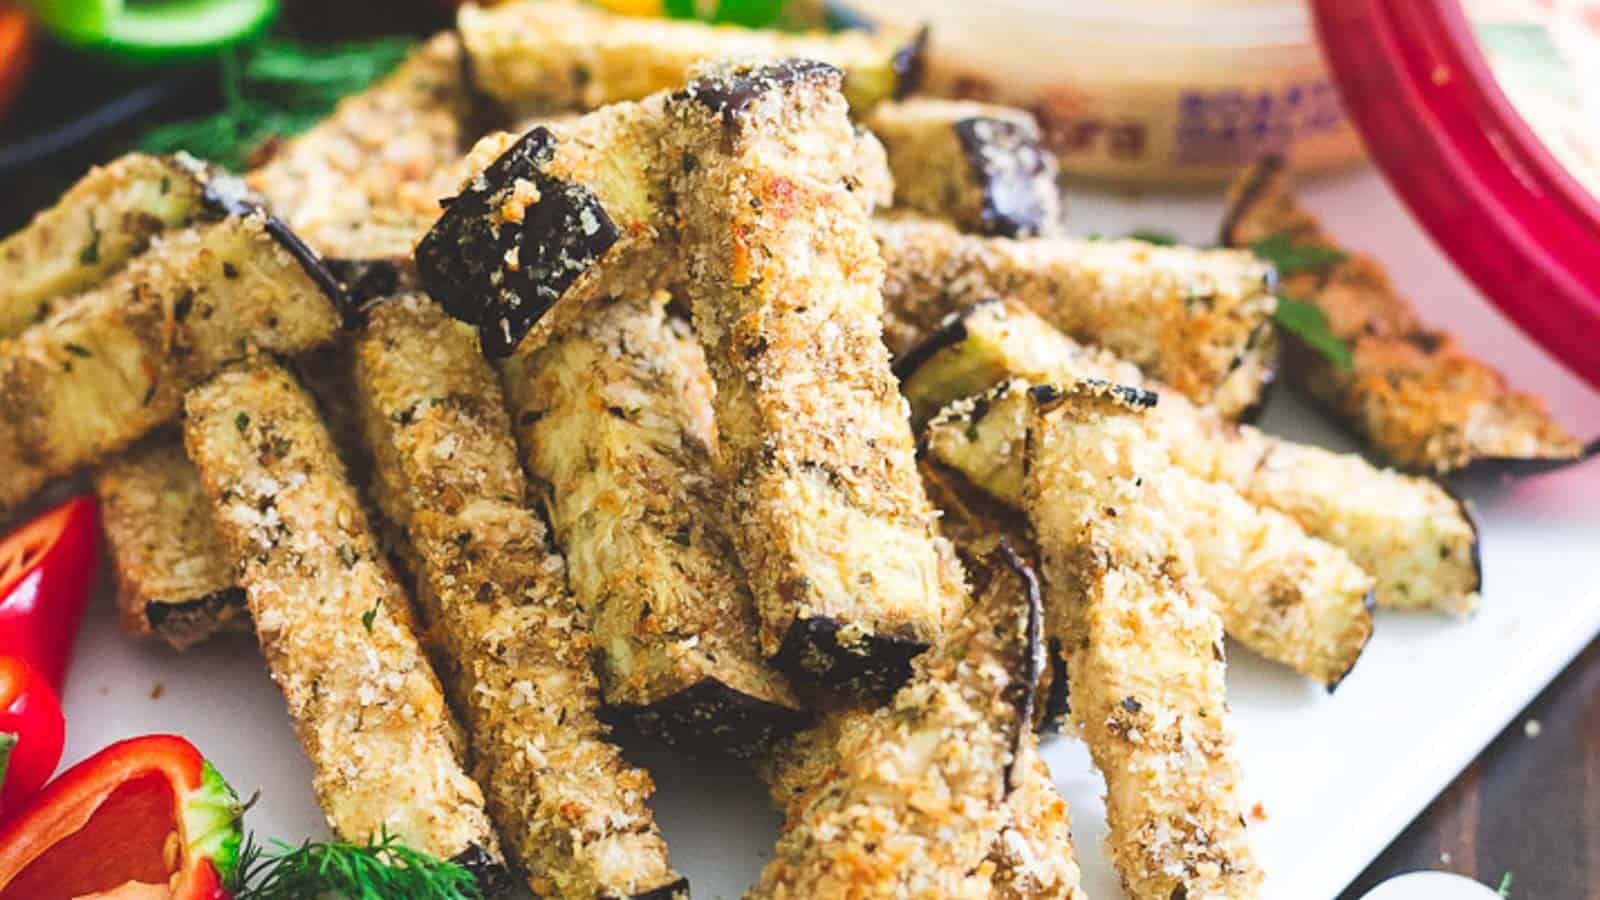 Eggplant fries on a white plate with hummus as a dip.